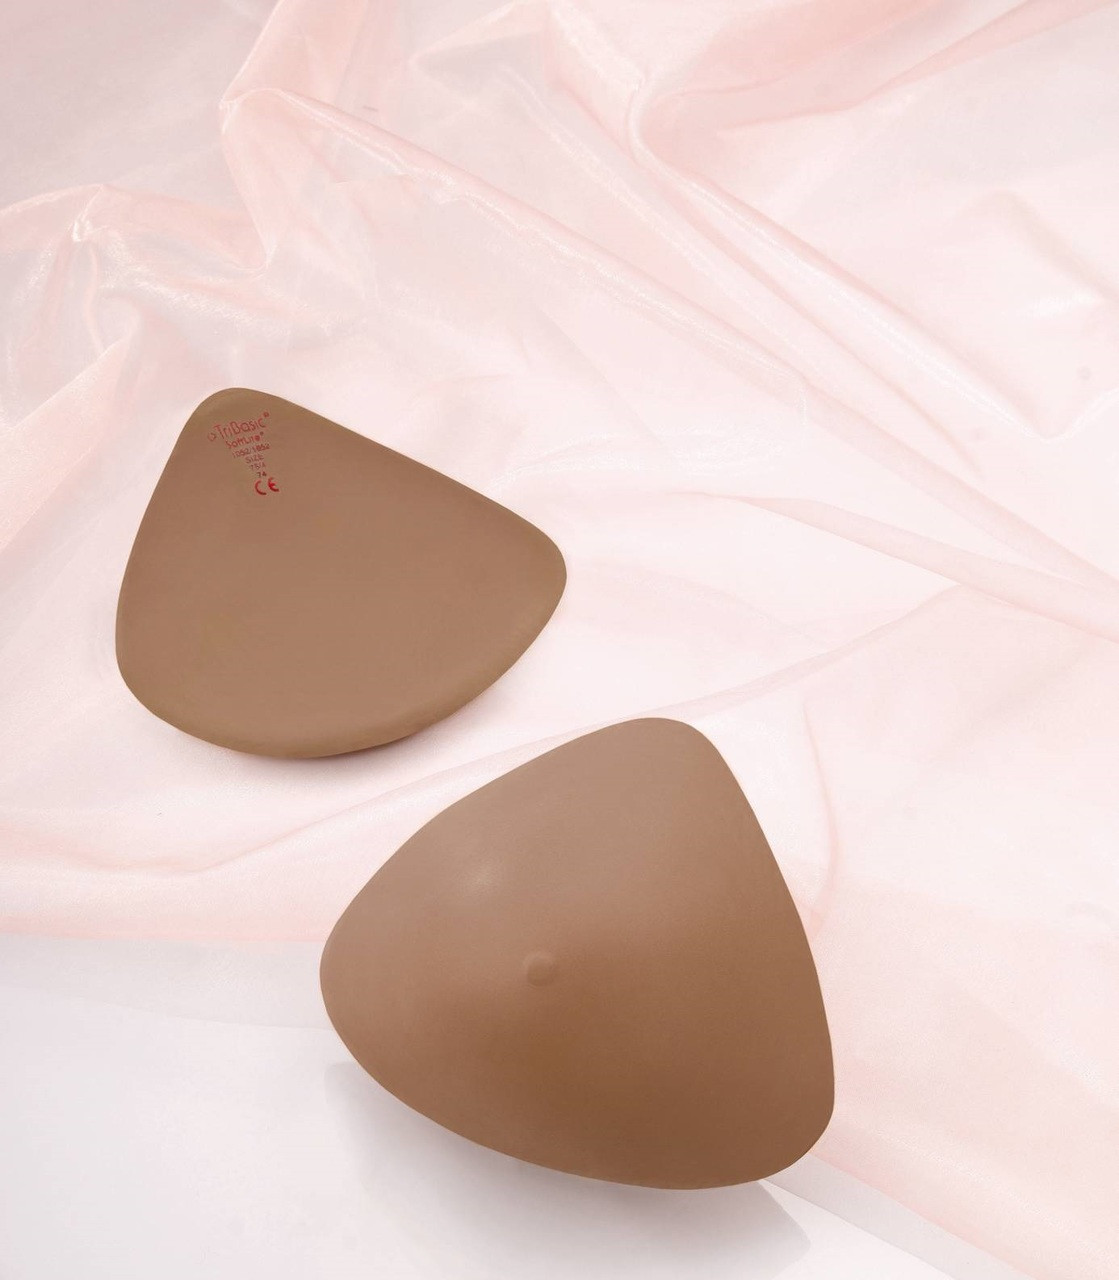 Silicone Breast Prosthesis by Anita - 1052X- Lightweight silicone